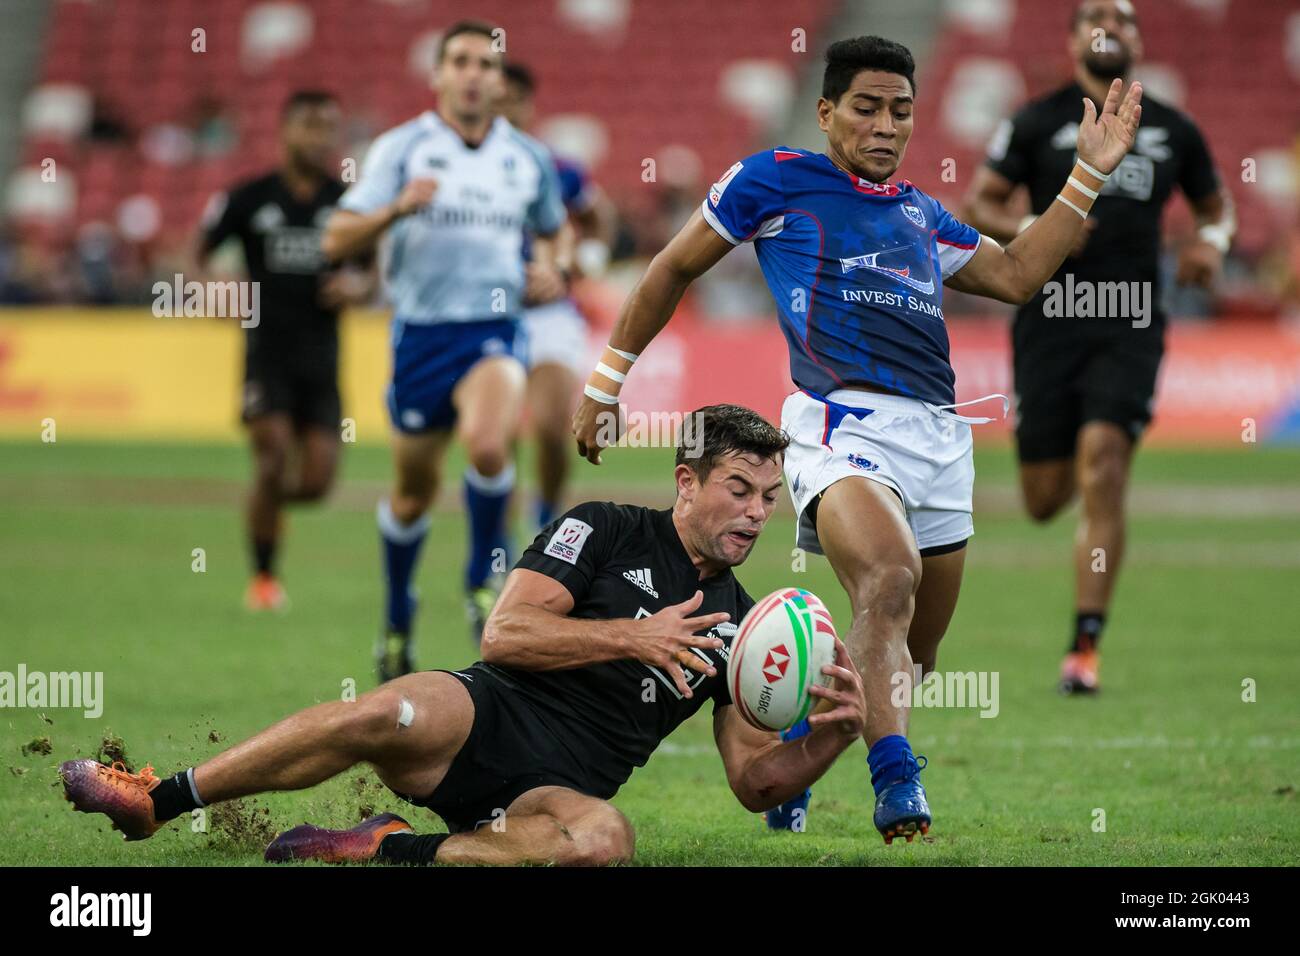 SINGAPORE-APRIL 14: Andrew Knewstubb of New Zealand 7s Team (left/black) plays against a Samoa 7s team player (blue) during Day 2 of HSBC World Rugby Singapore Sevens on April 14, 2019 at National Stadium in Singapore Stock Photo